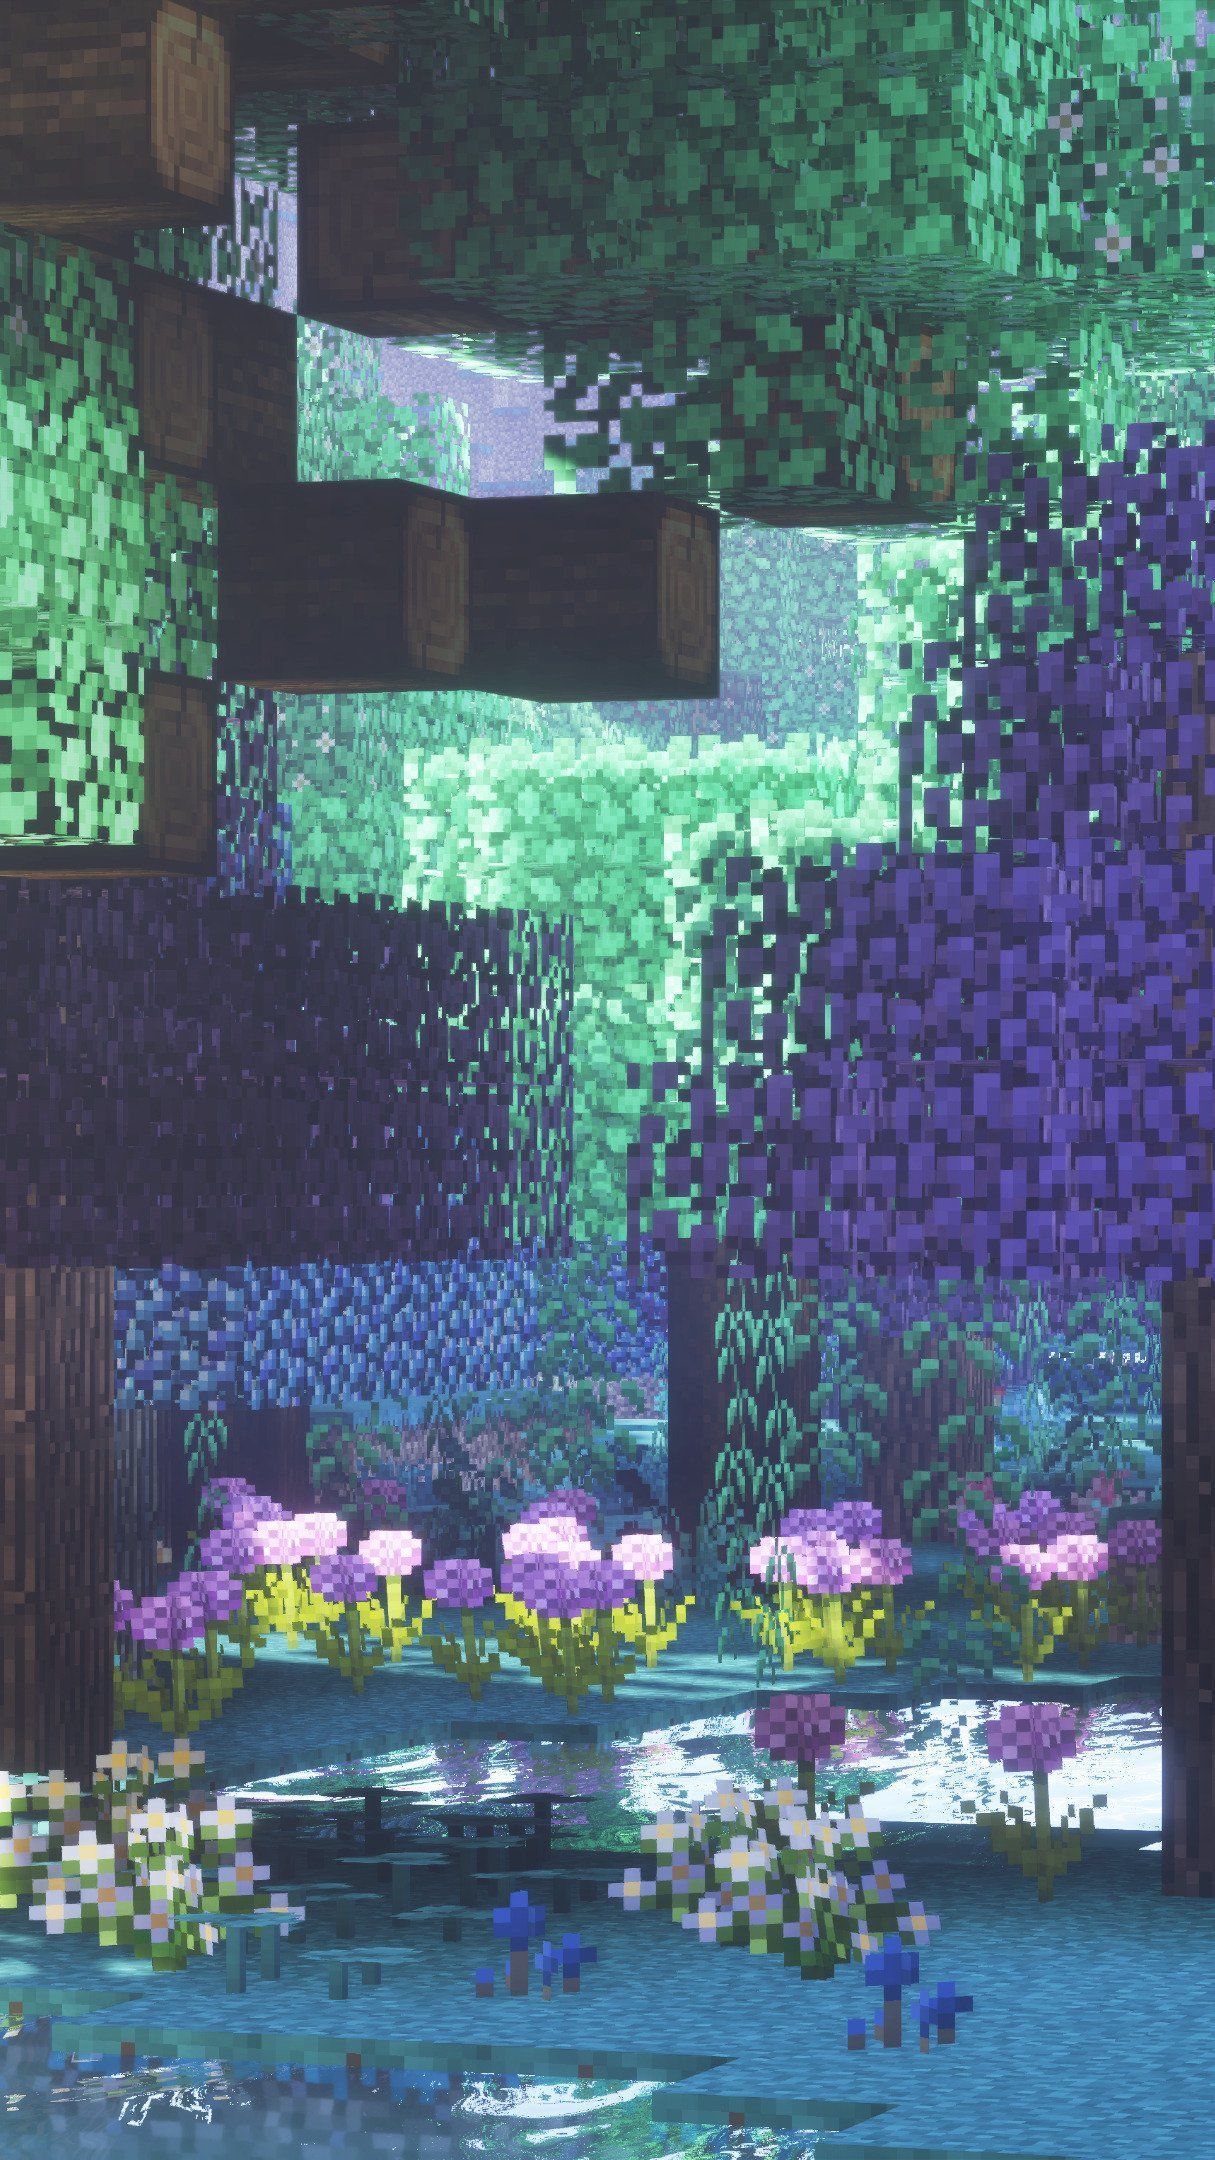 A minecraft world with trees and flowers - Minecraft